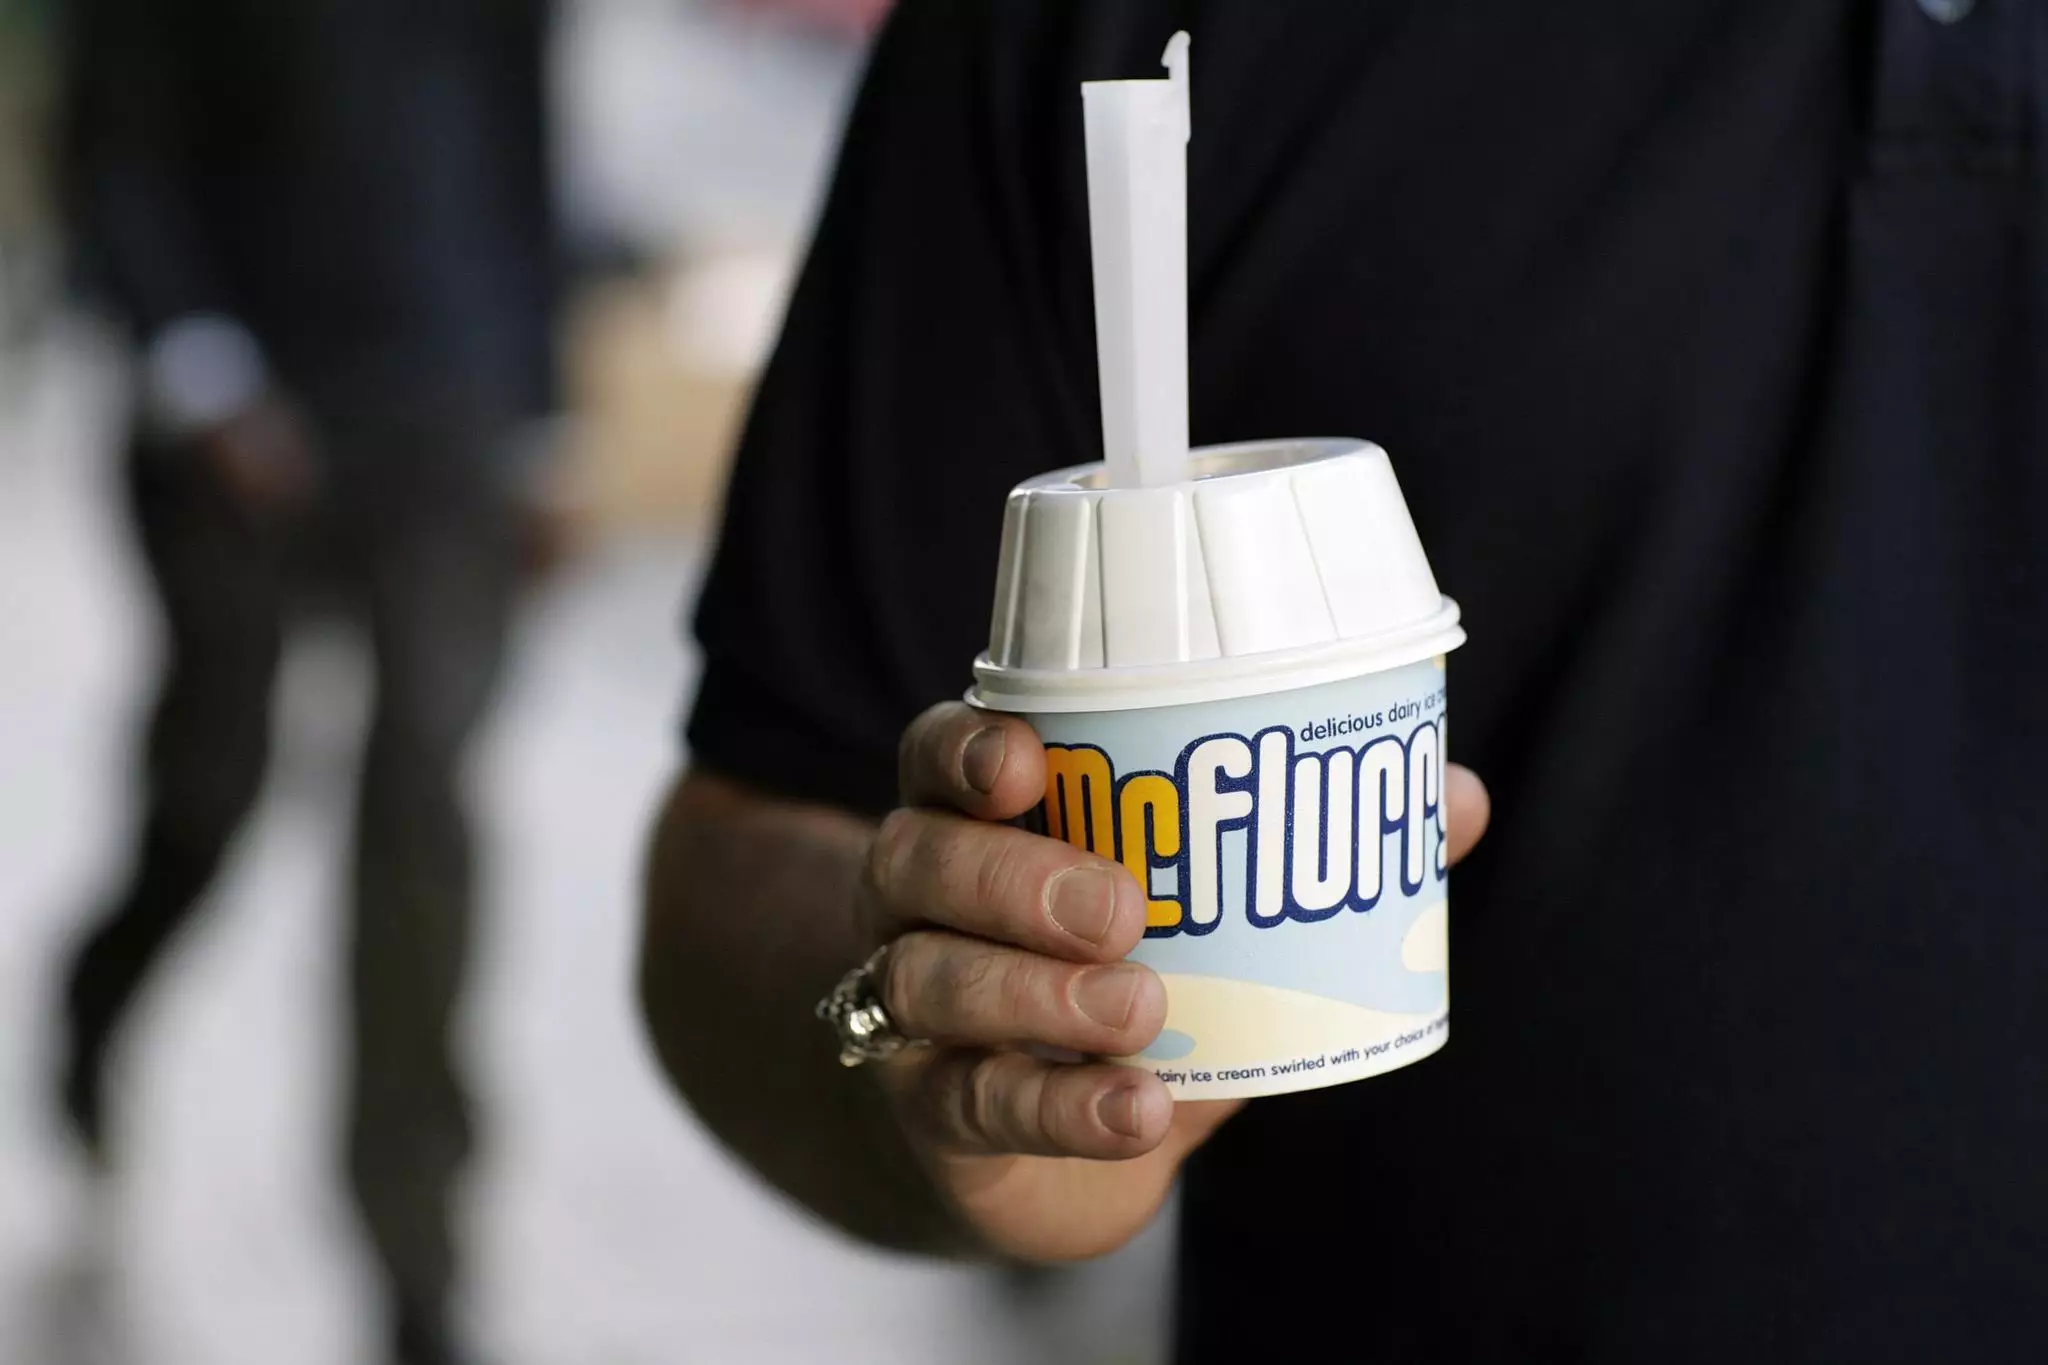 The McFlurry arrived in the UK in the early 2000s.